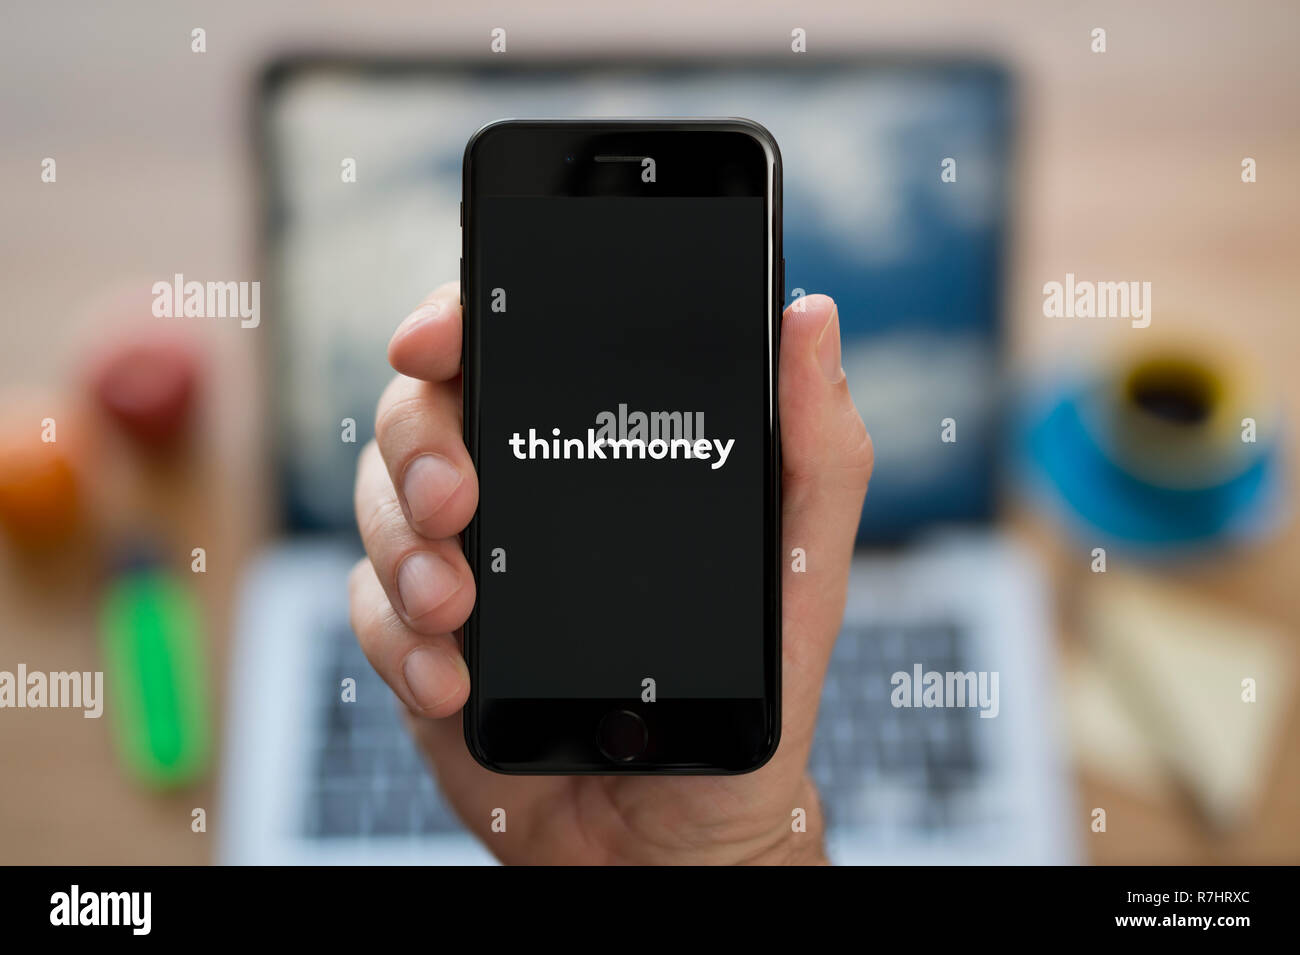 A man looks at his iPhone which displays the ThinkMoney logo (Editorial use only). Stock Photo